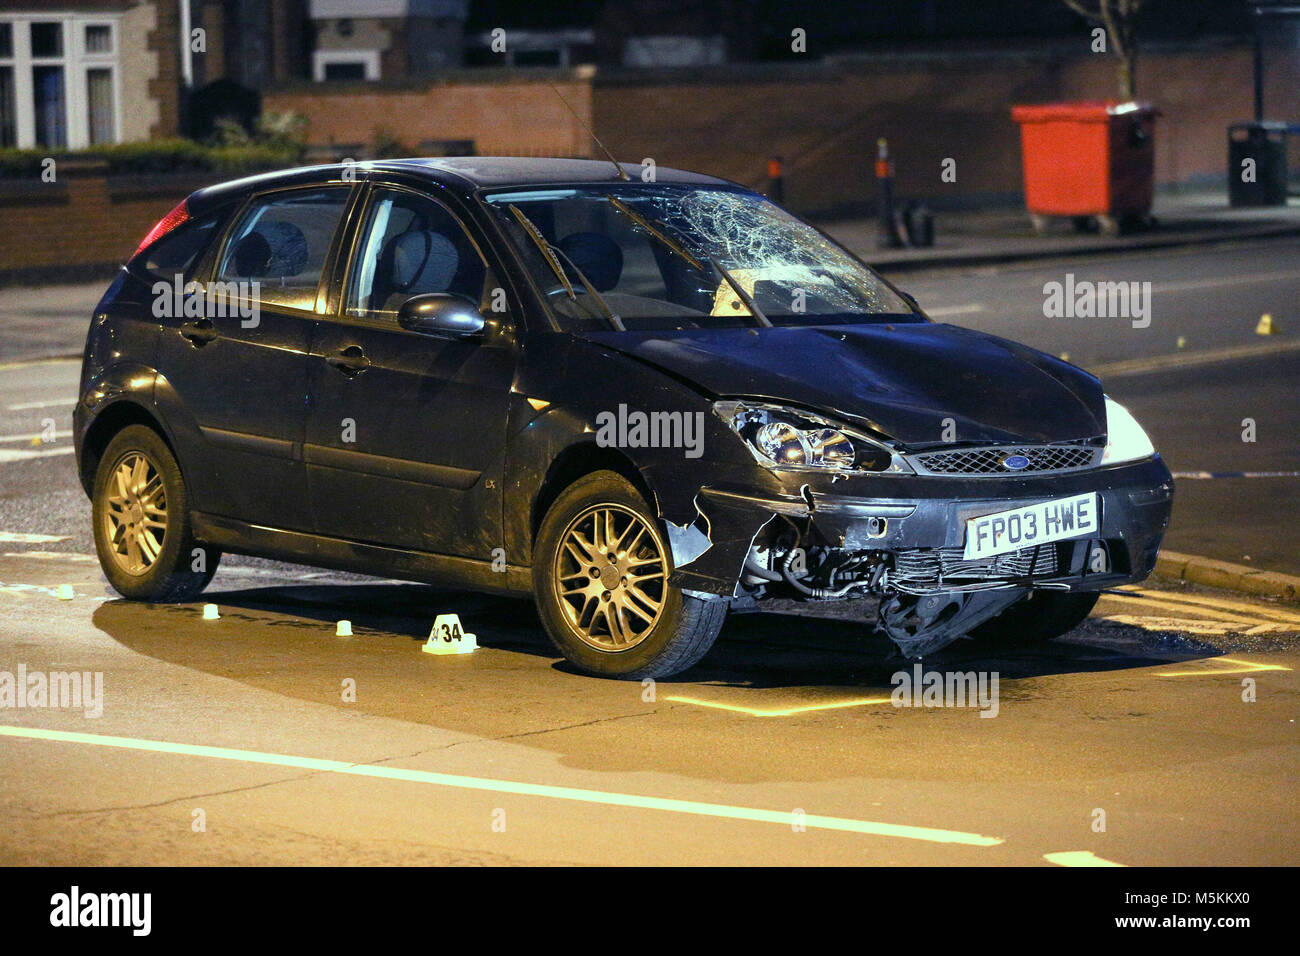 A black Ford Focus which was found abandoned a short time after two year old Casper Platt-May and his six year old brother Corey Platt-May were killed in a hit-and-run collision in Coventry after being struck by the car on Thursday afternoon. Robert Brown, 53, and Gwendoline Harrison, 41, have been charged with causing death by dangerous driving after the brothers were killed in the collision. Stock Photo